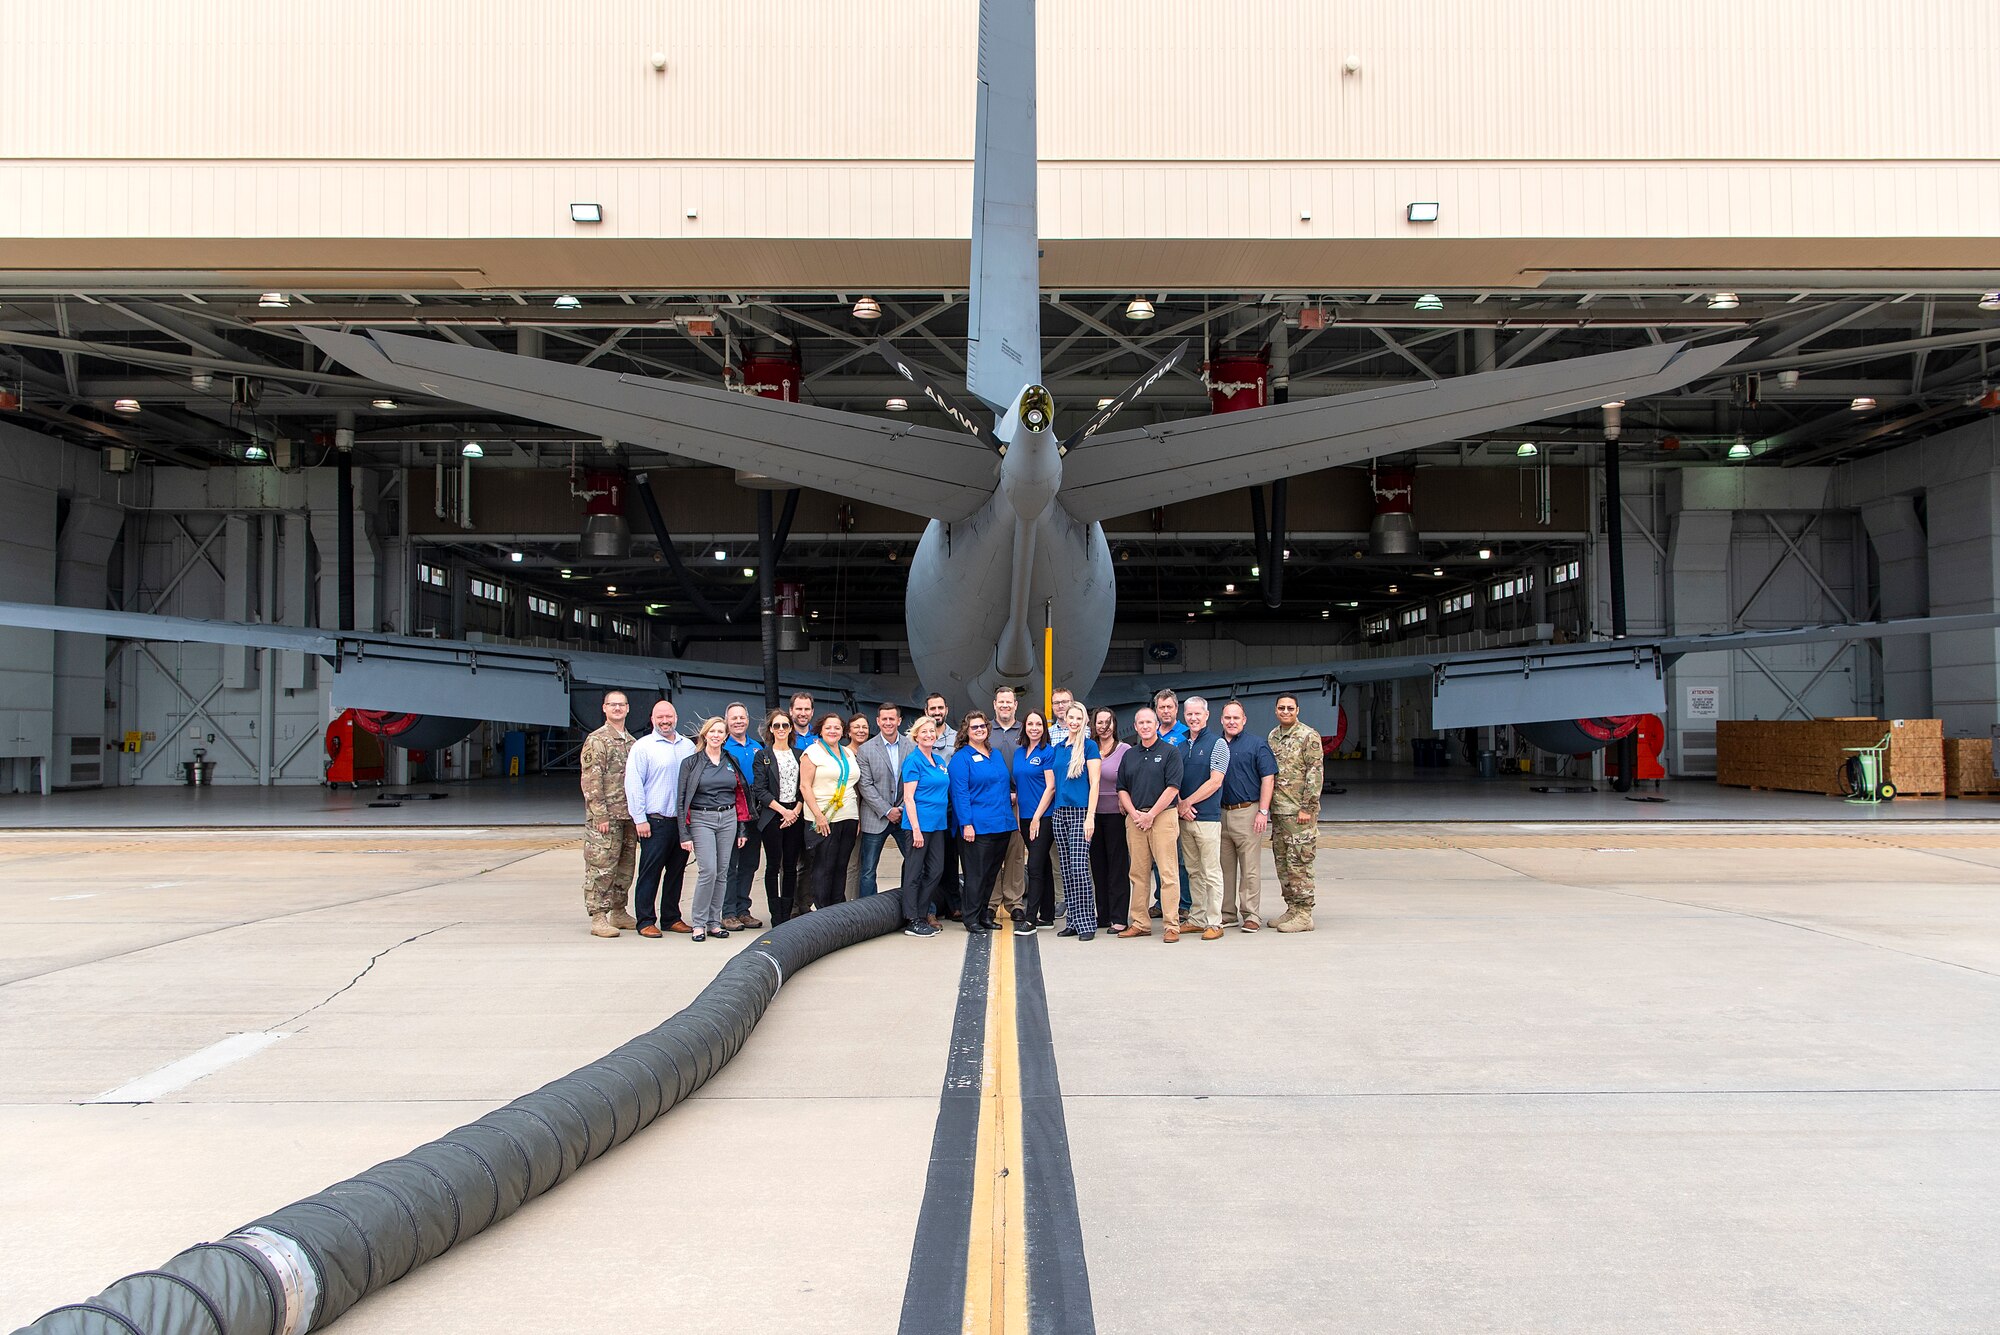 Honorary commanders from the 6th and 927th air refueling wings pause for a group photo in front of a KC-135 Stratotanker at MacDill Air Force Base, Fla., Dec. 12, 2019. The honorary commanders toured the 6th Maintenance Group to gain first-hand experience on how the mission gets accomplished.